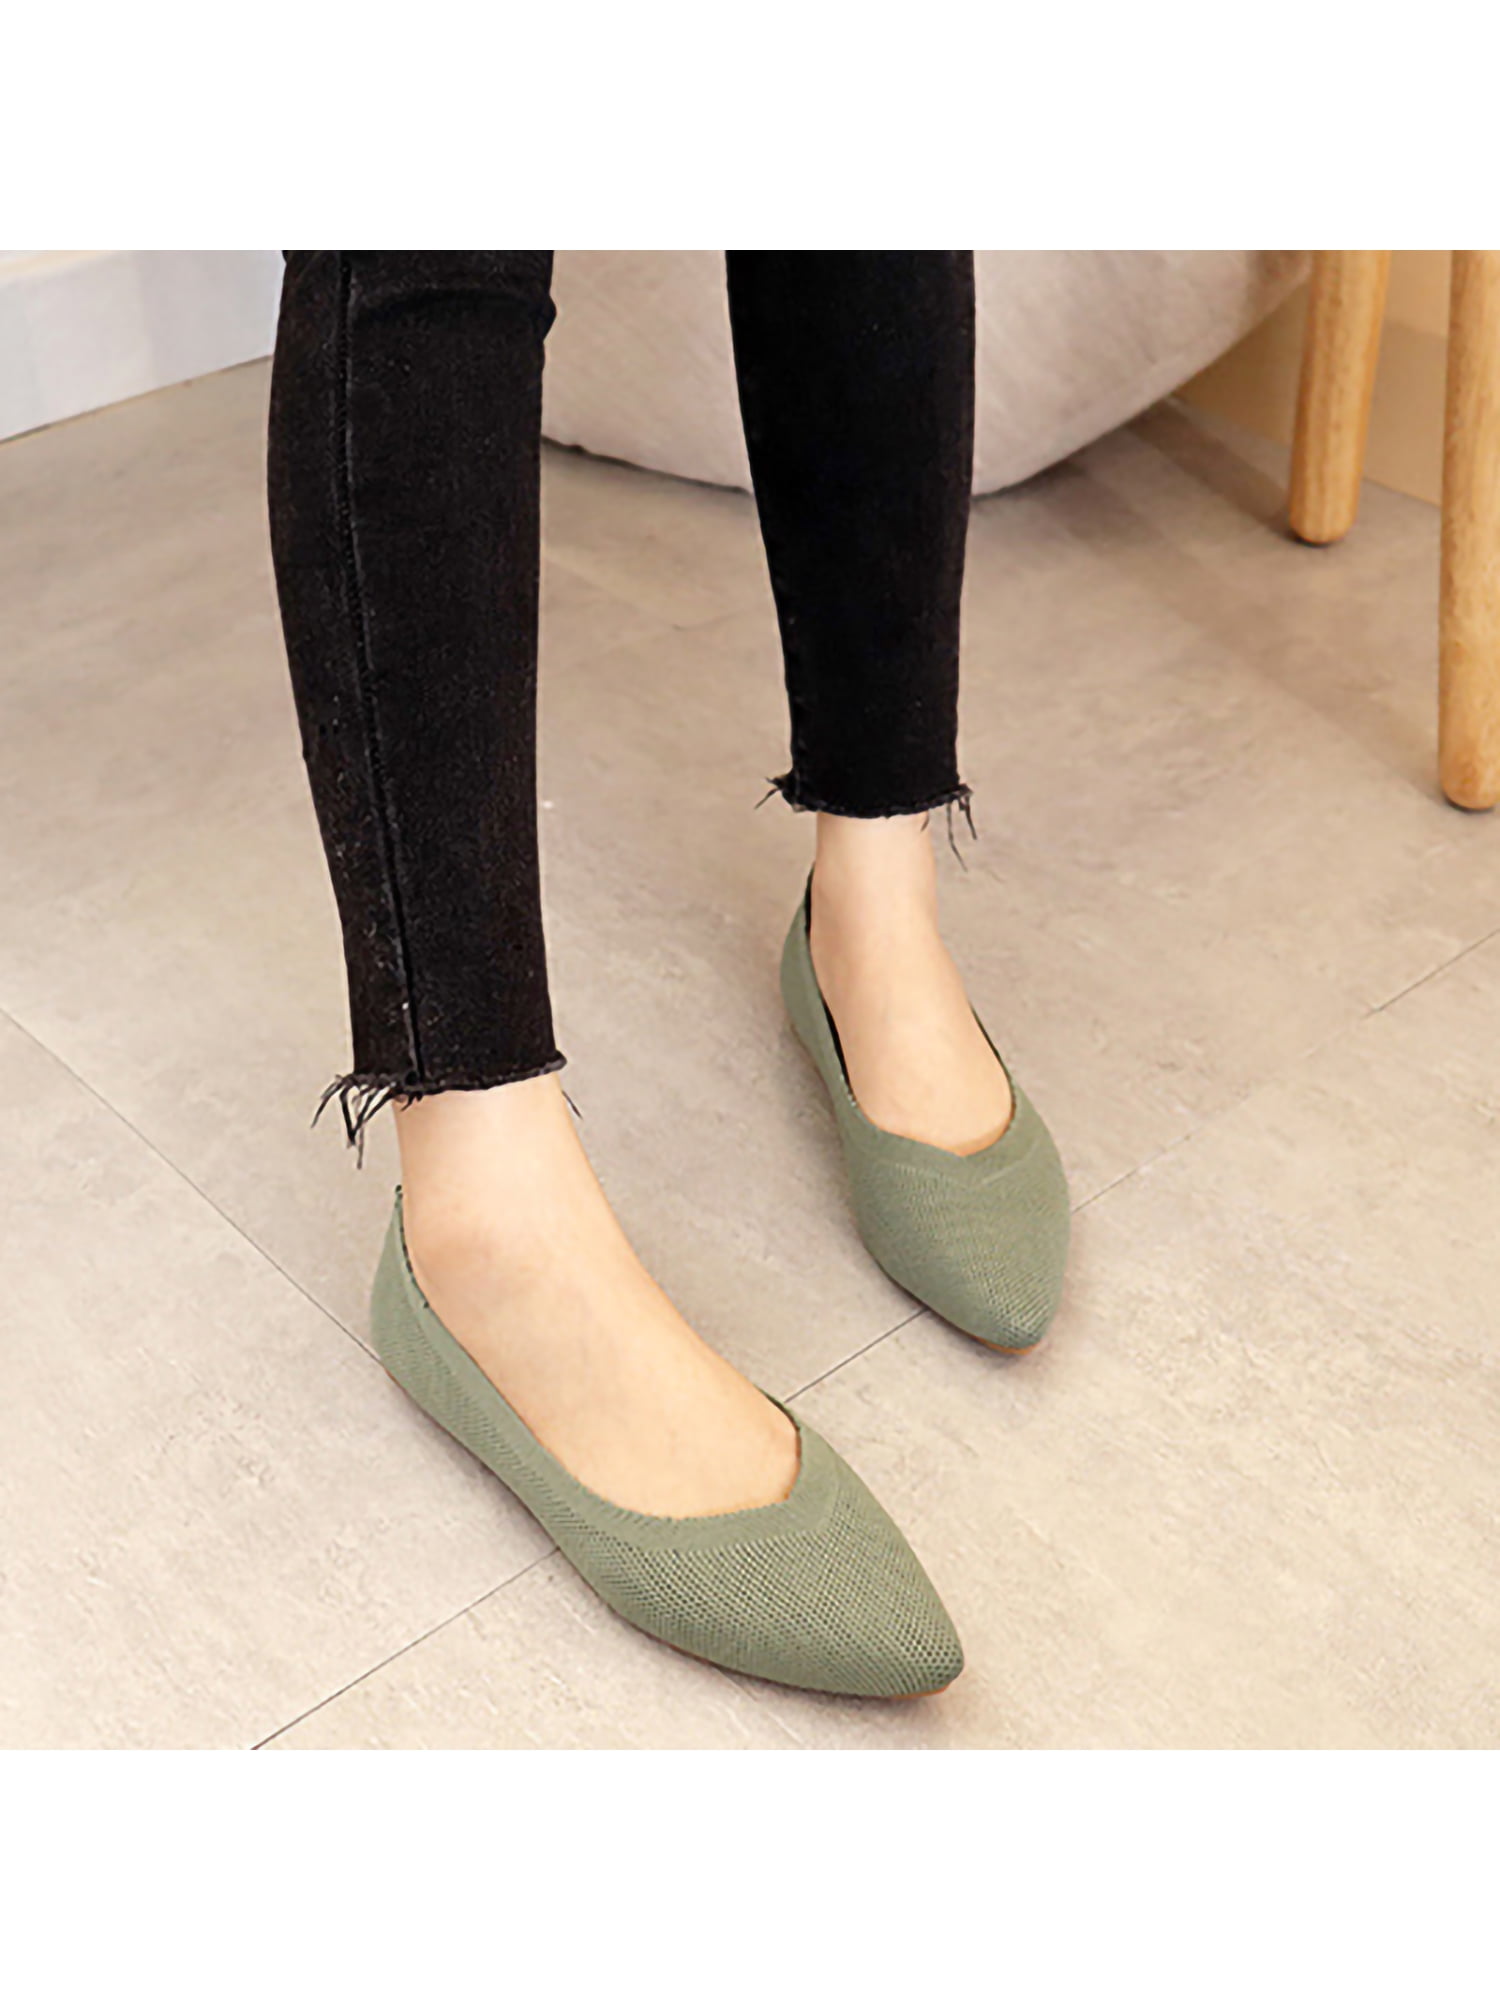 DREAM PAIRS Women’s Comfortable Ballet Dressy Work Pointed Toe Knit Flats Shoes 